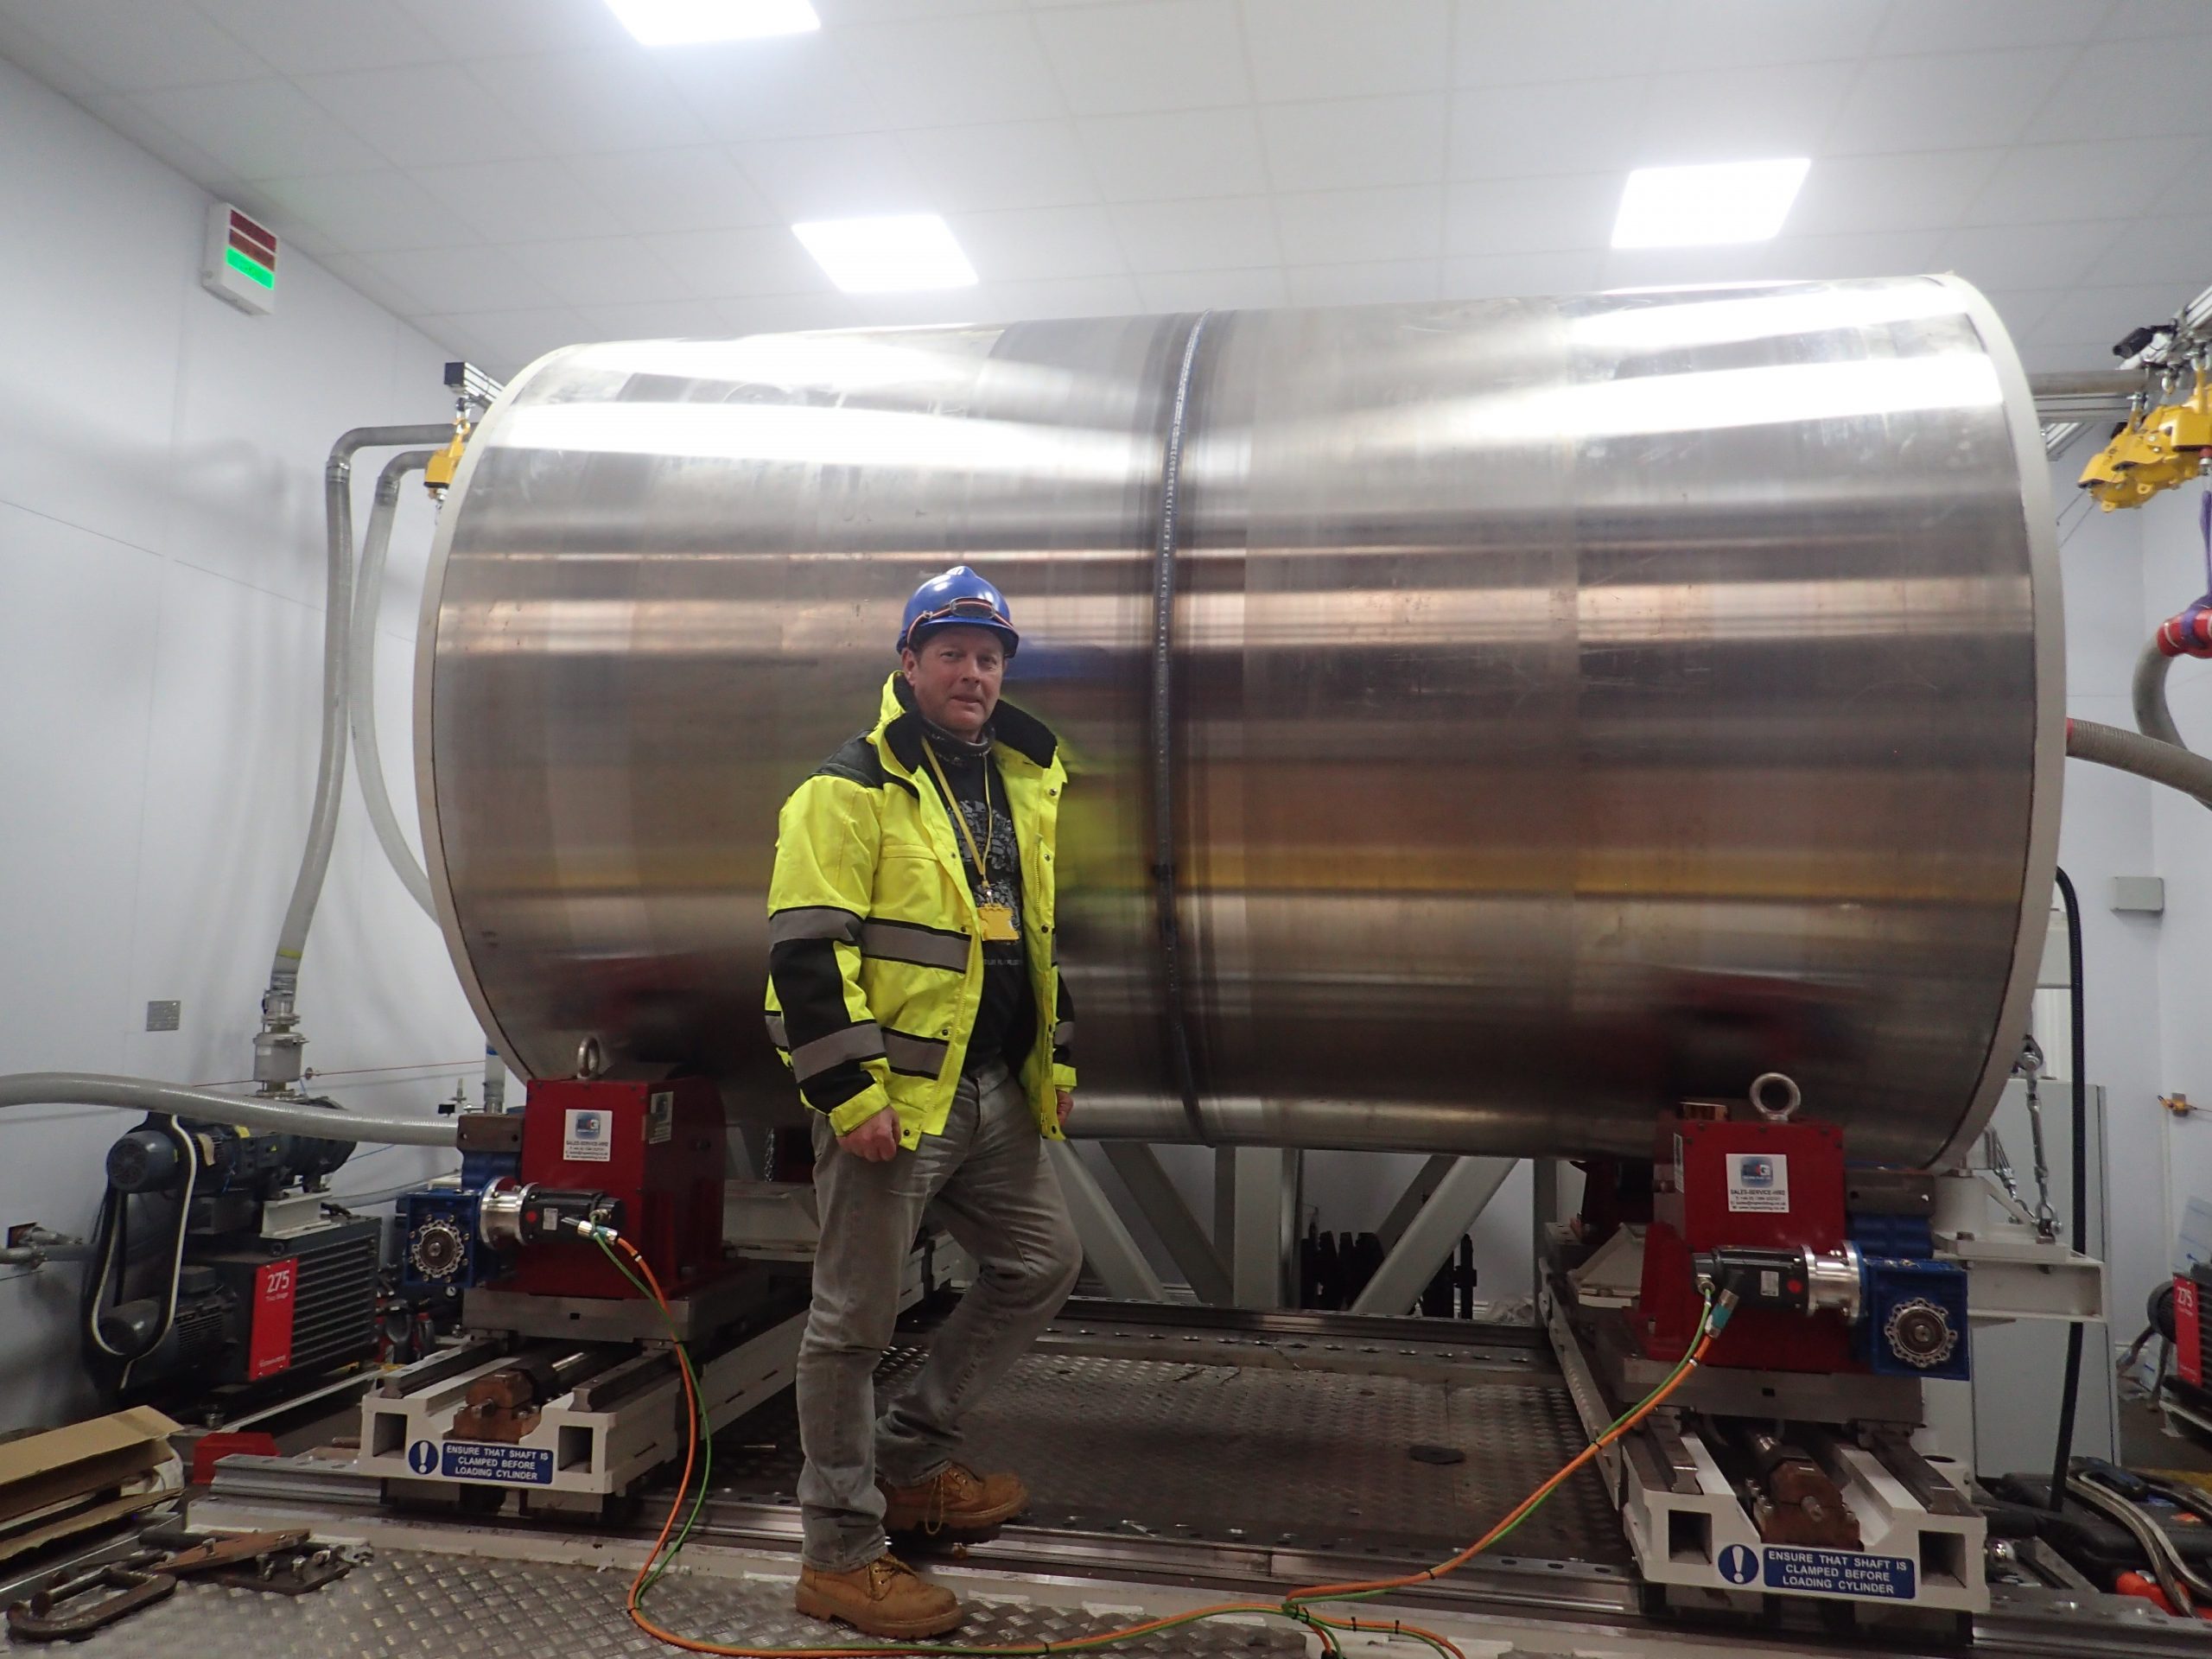 Chris punshon standing in front of a micro modular reactor welded using an ebflow system